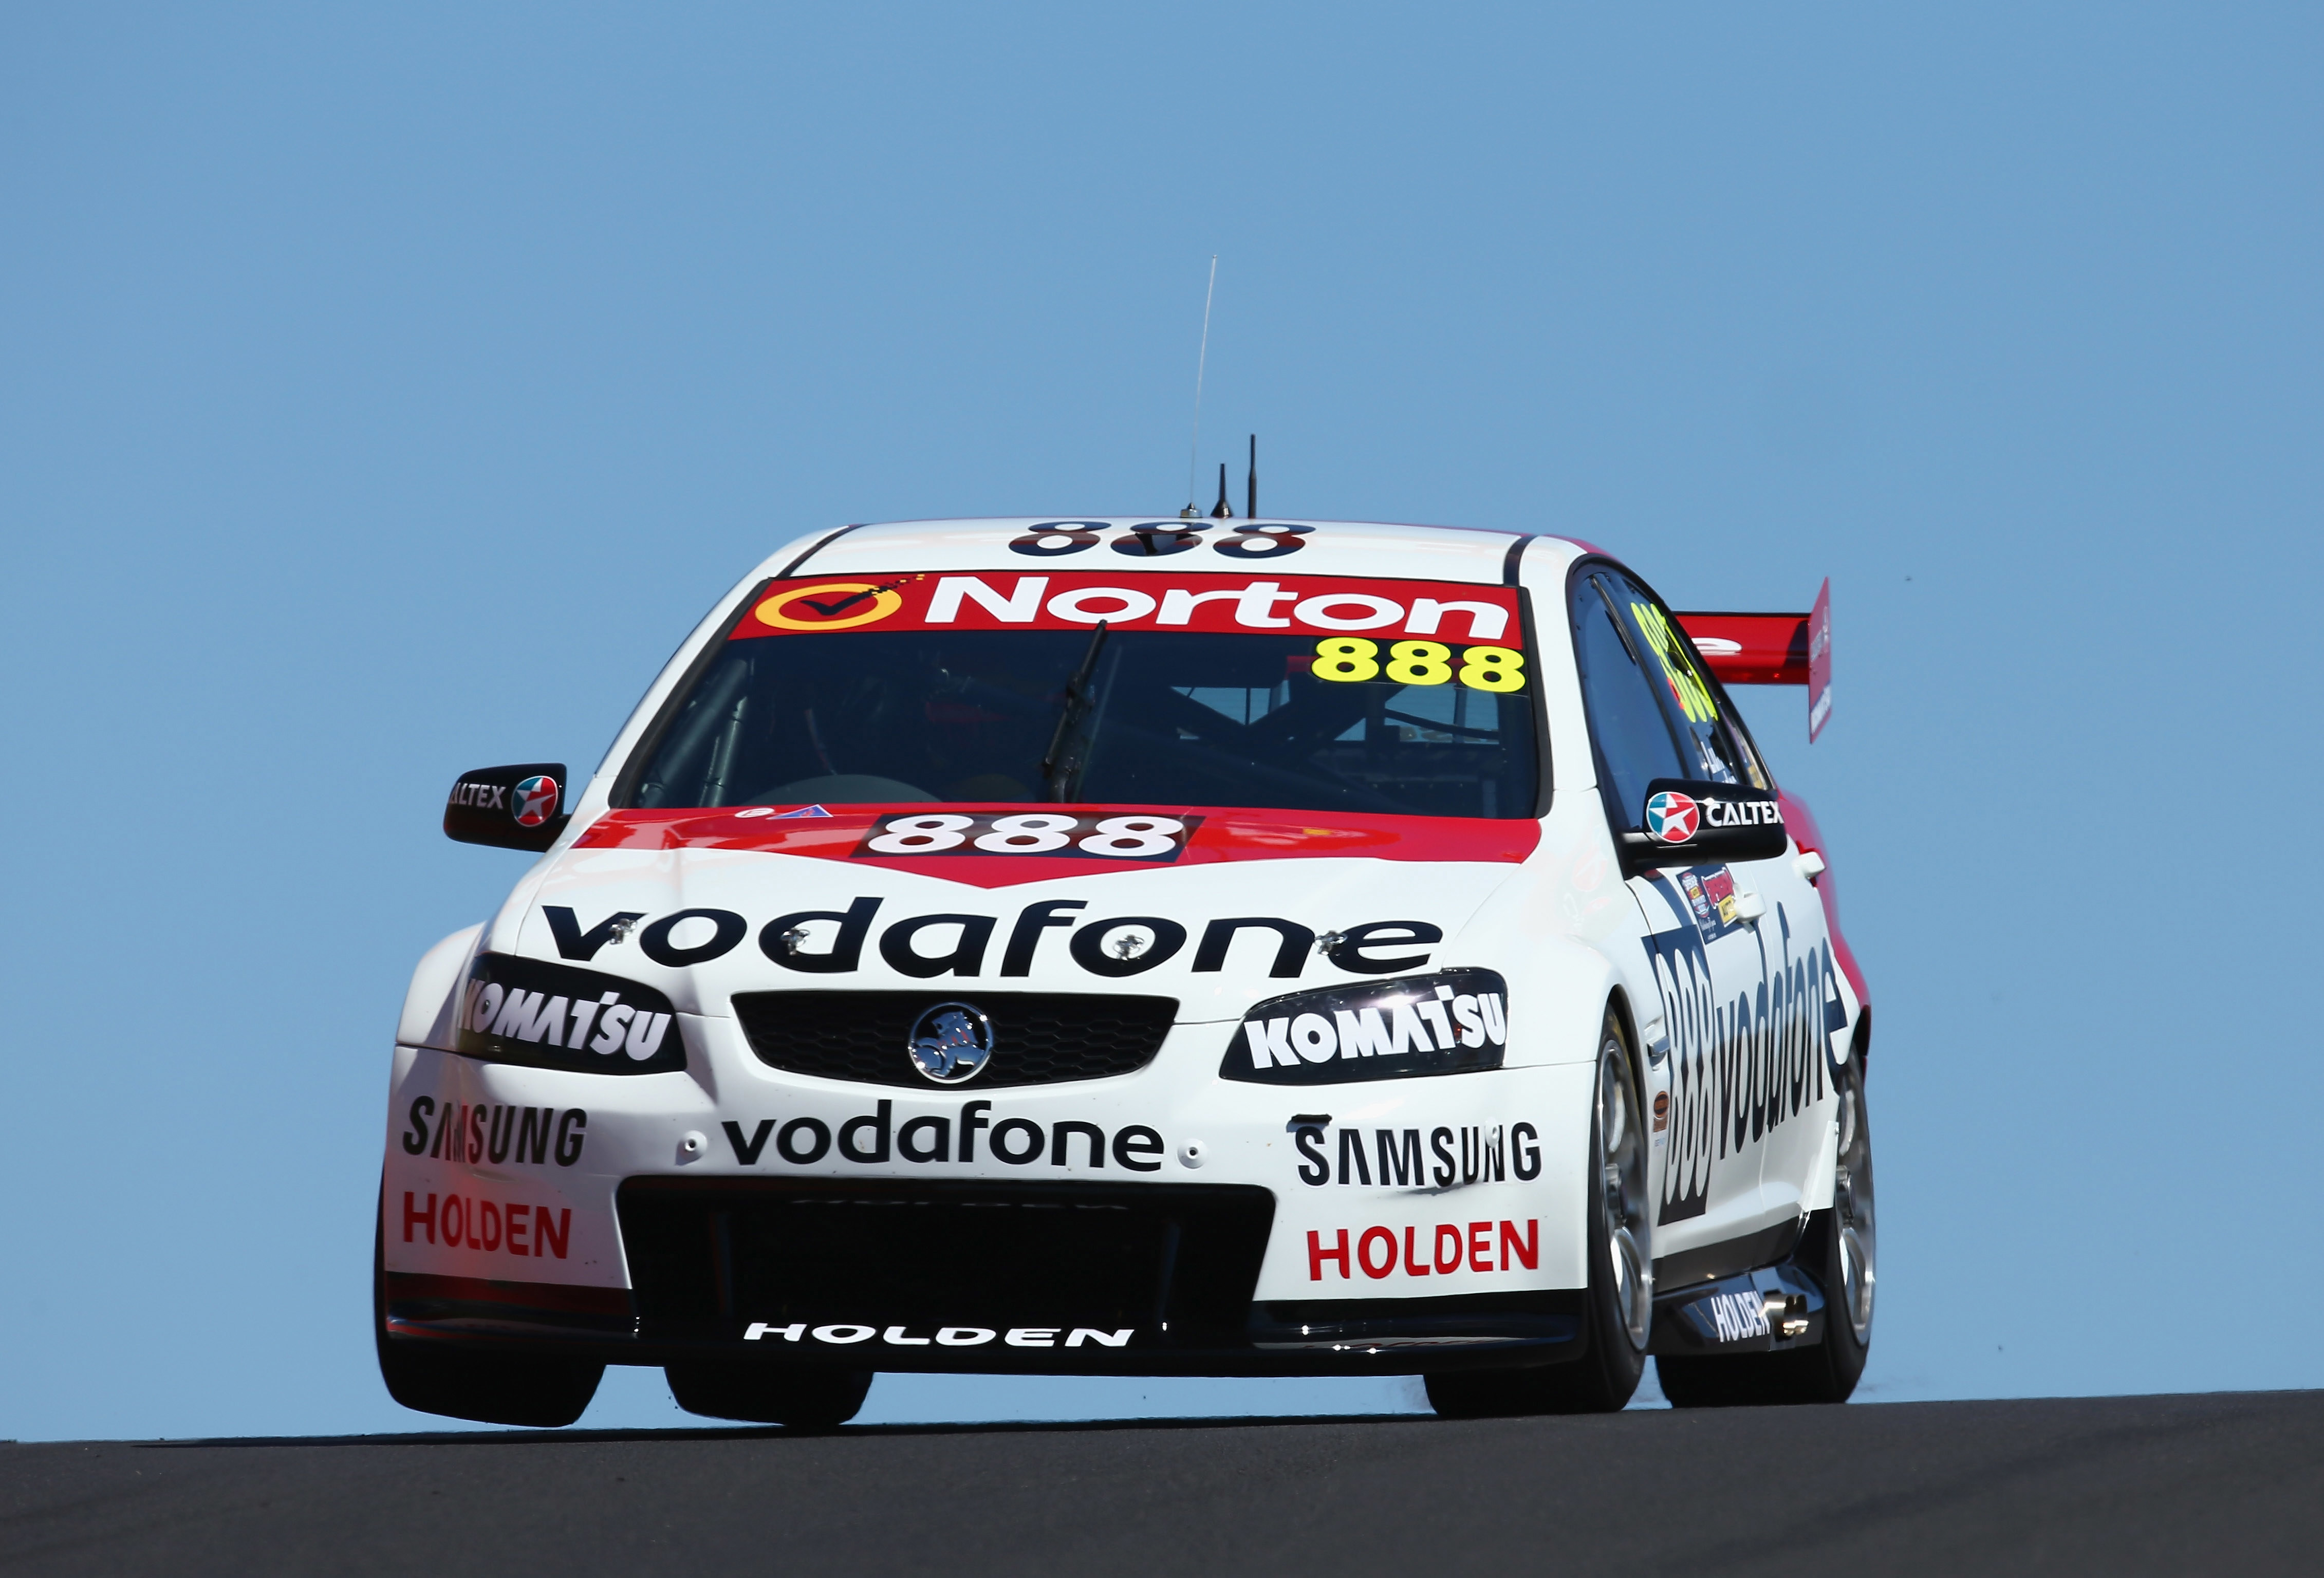 The Craig Lowndes/Warren Luff Holden VE Commodore at the 2012 Bathurst 1000 in its Peter Brock tribute livery.